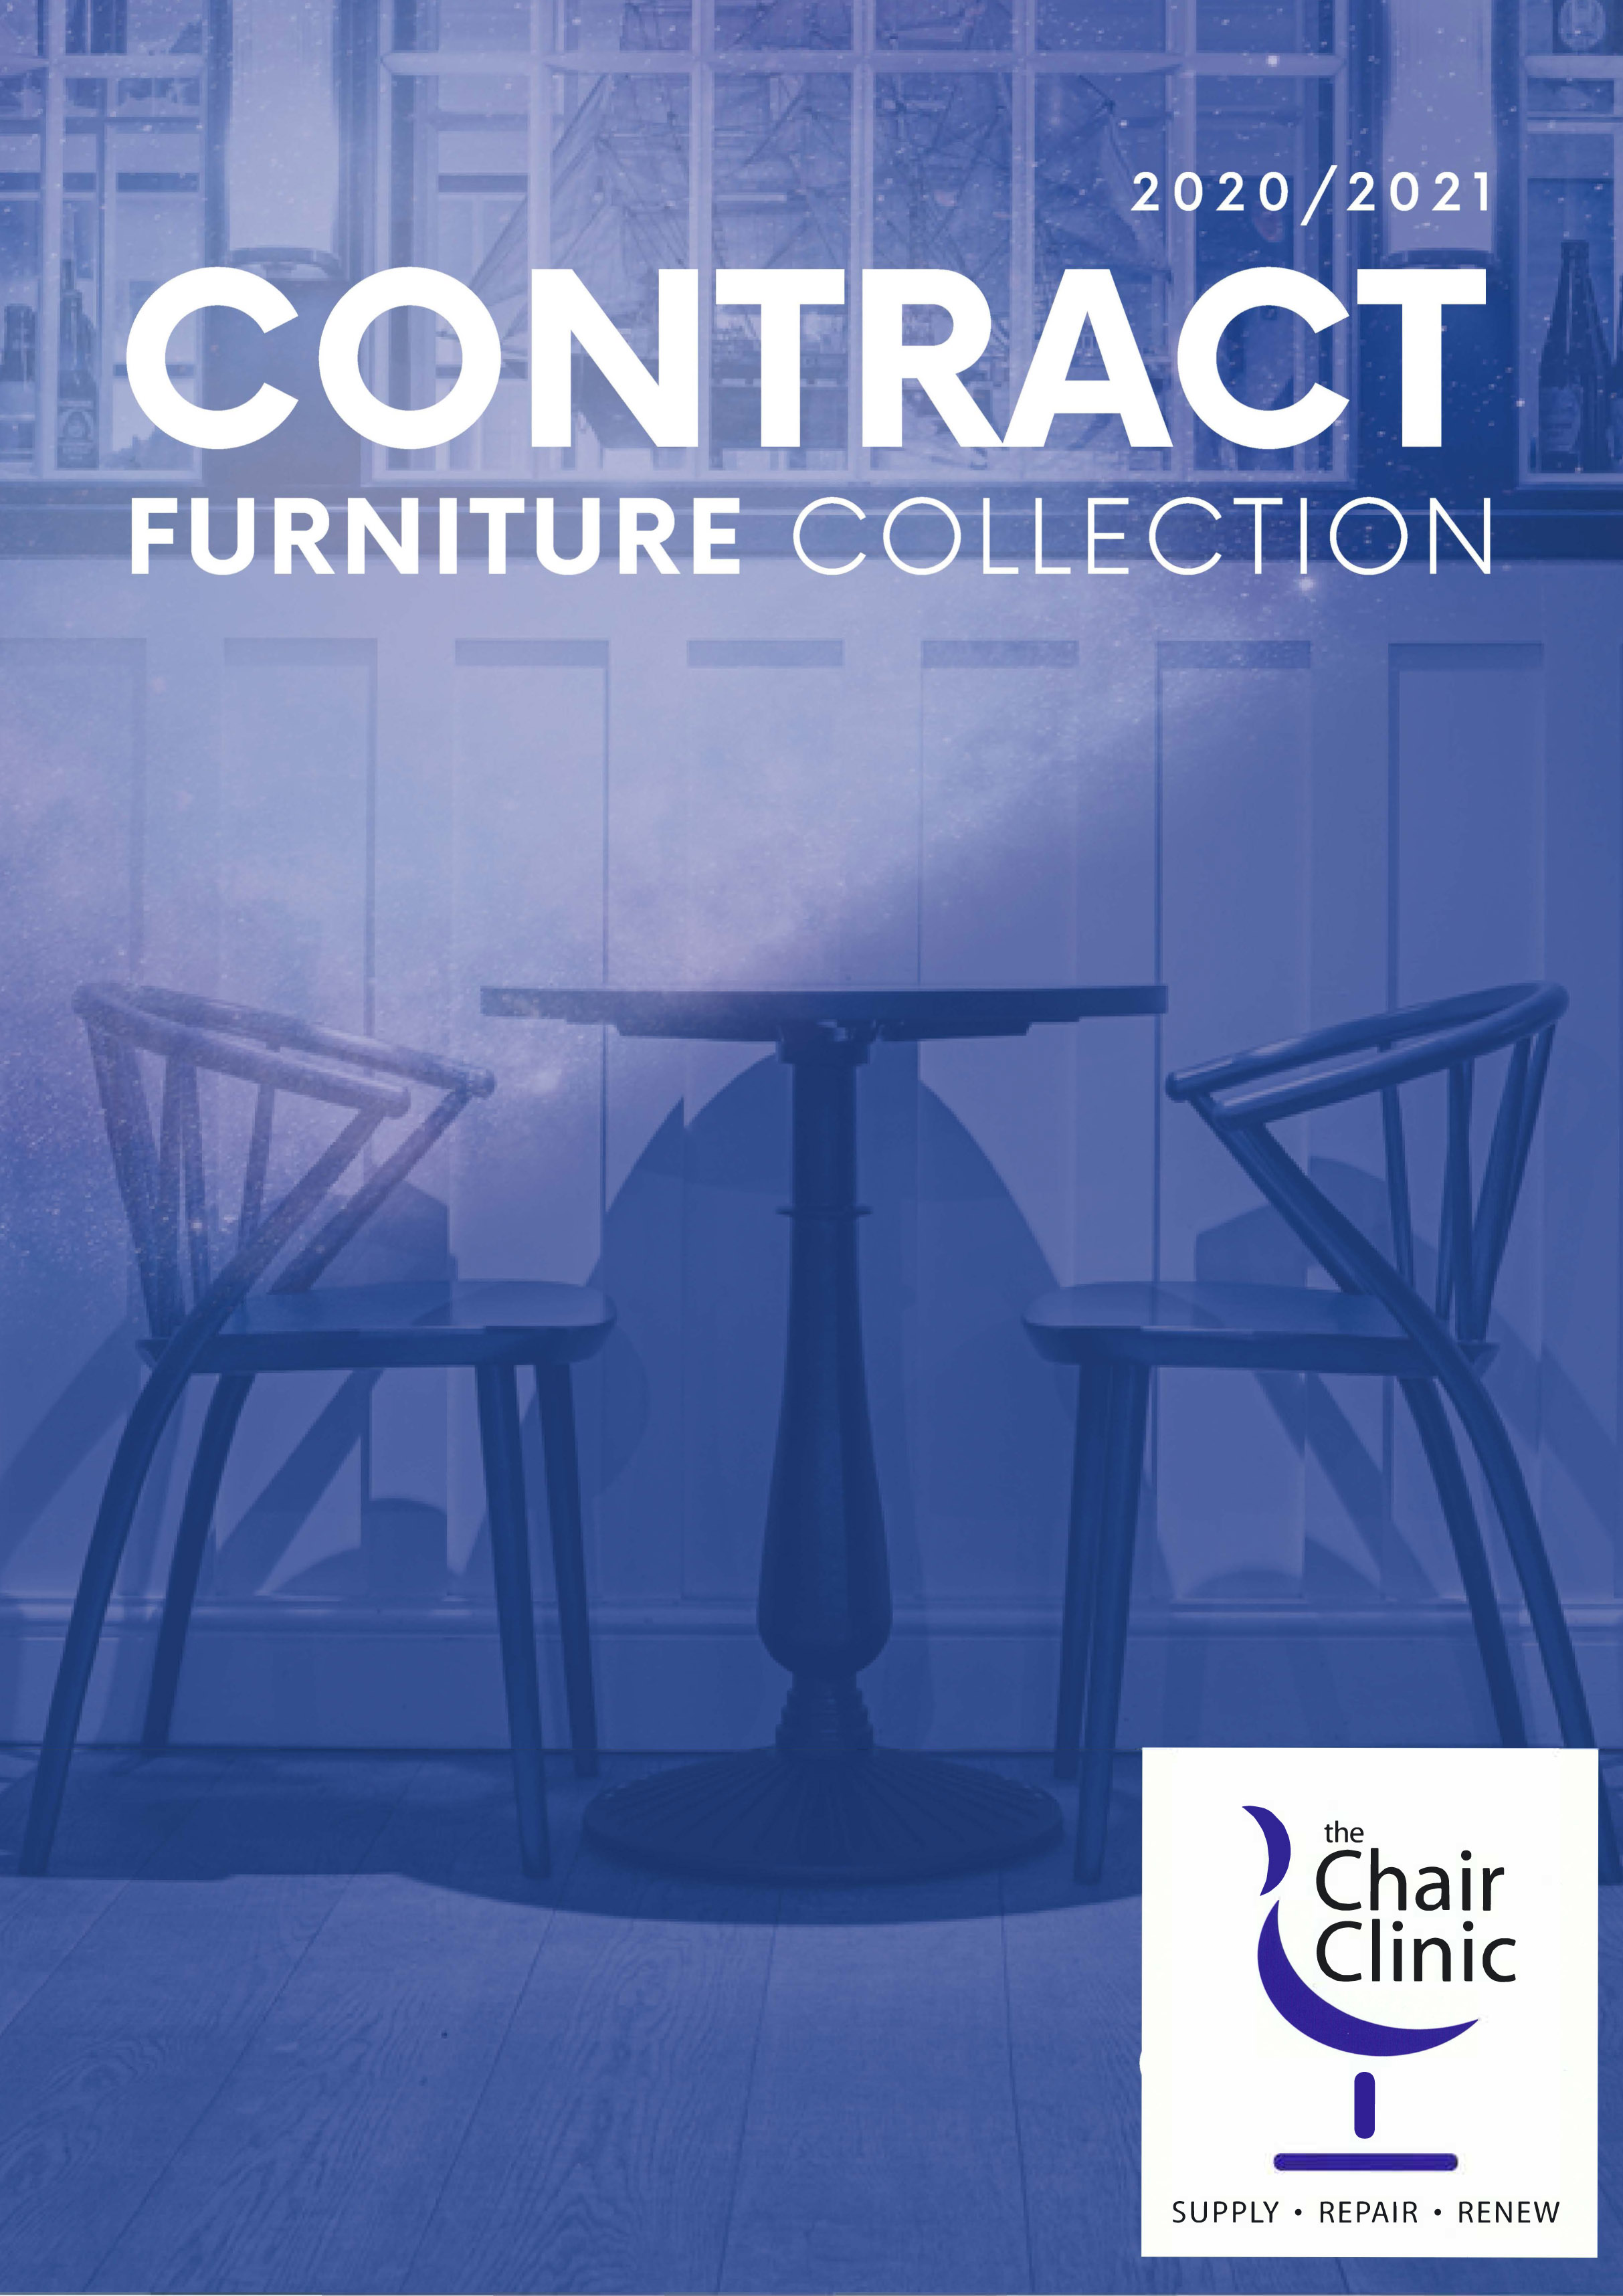 tcc-contract-furniture-collection-2020.jpg